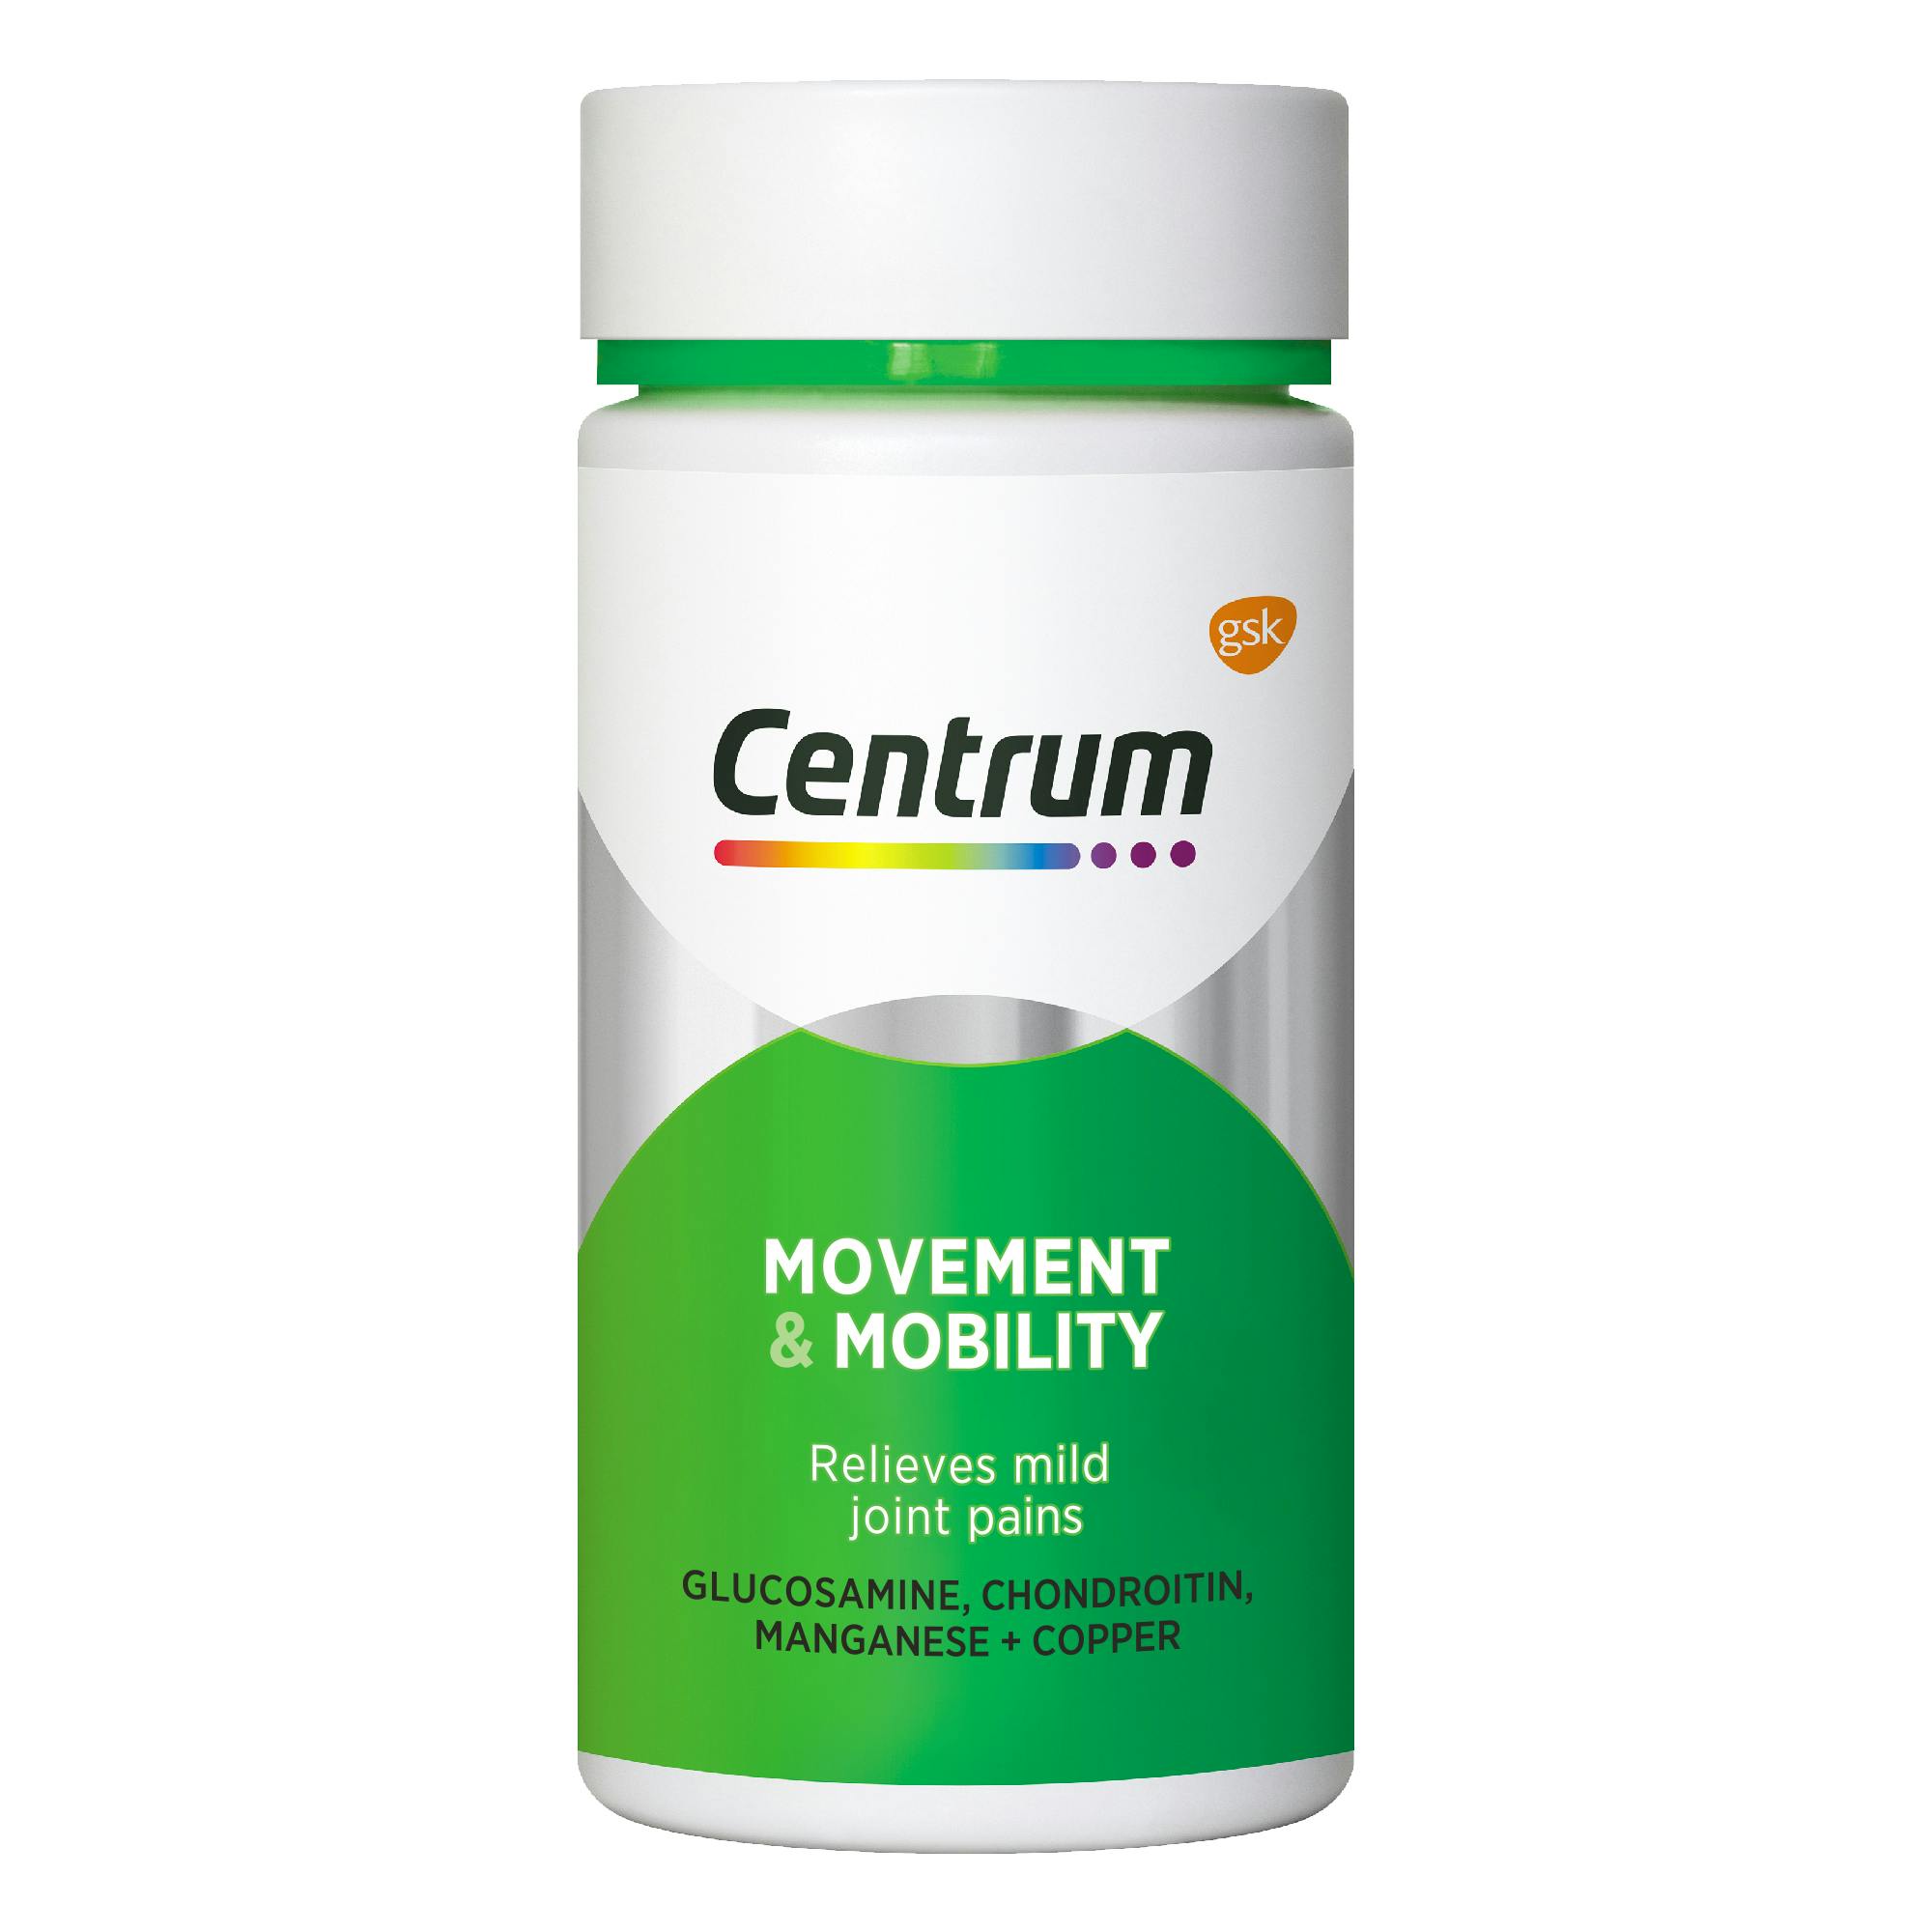 Bottle of Movement & Mobility from the Centrum Benefits Blend (50 tablets).